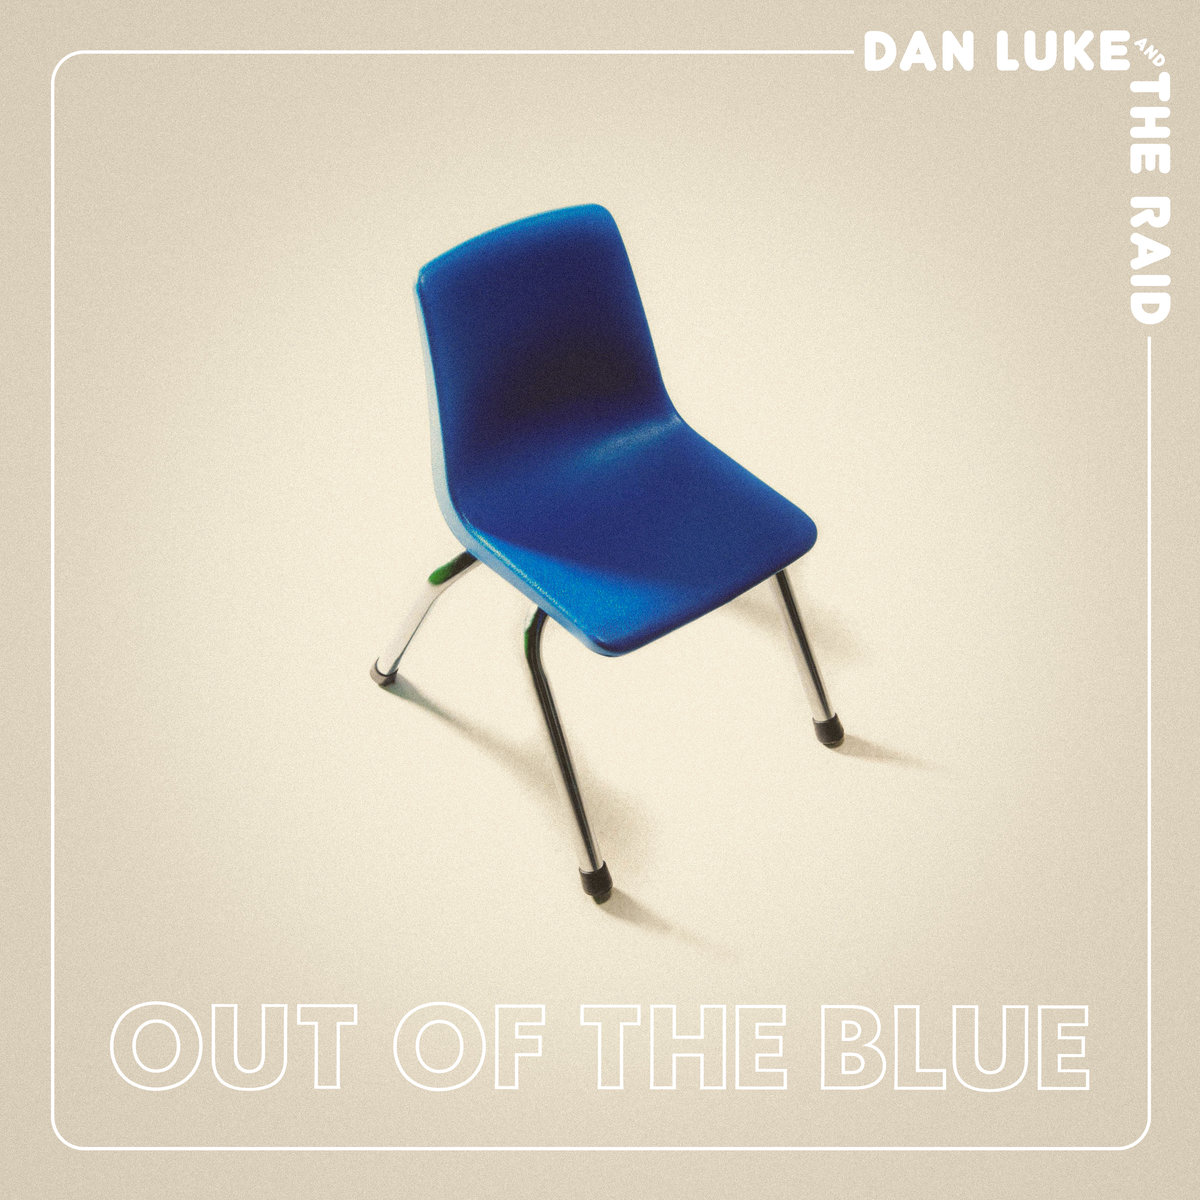 Dan Luke and The Raid - Out of the blue (2019)